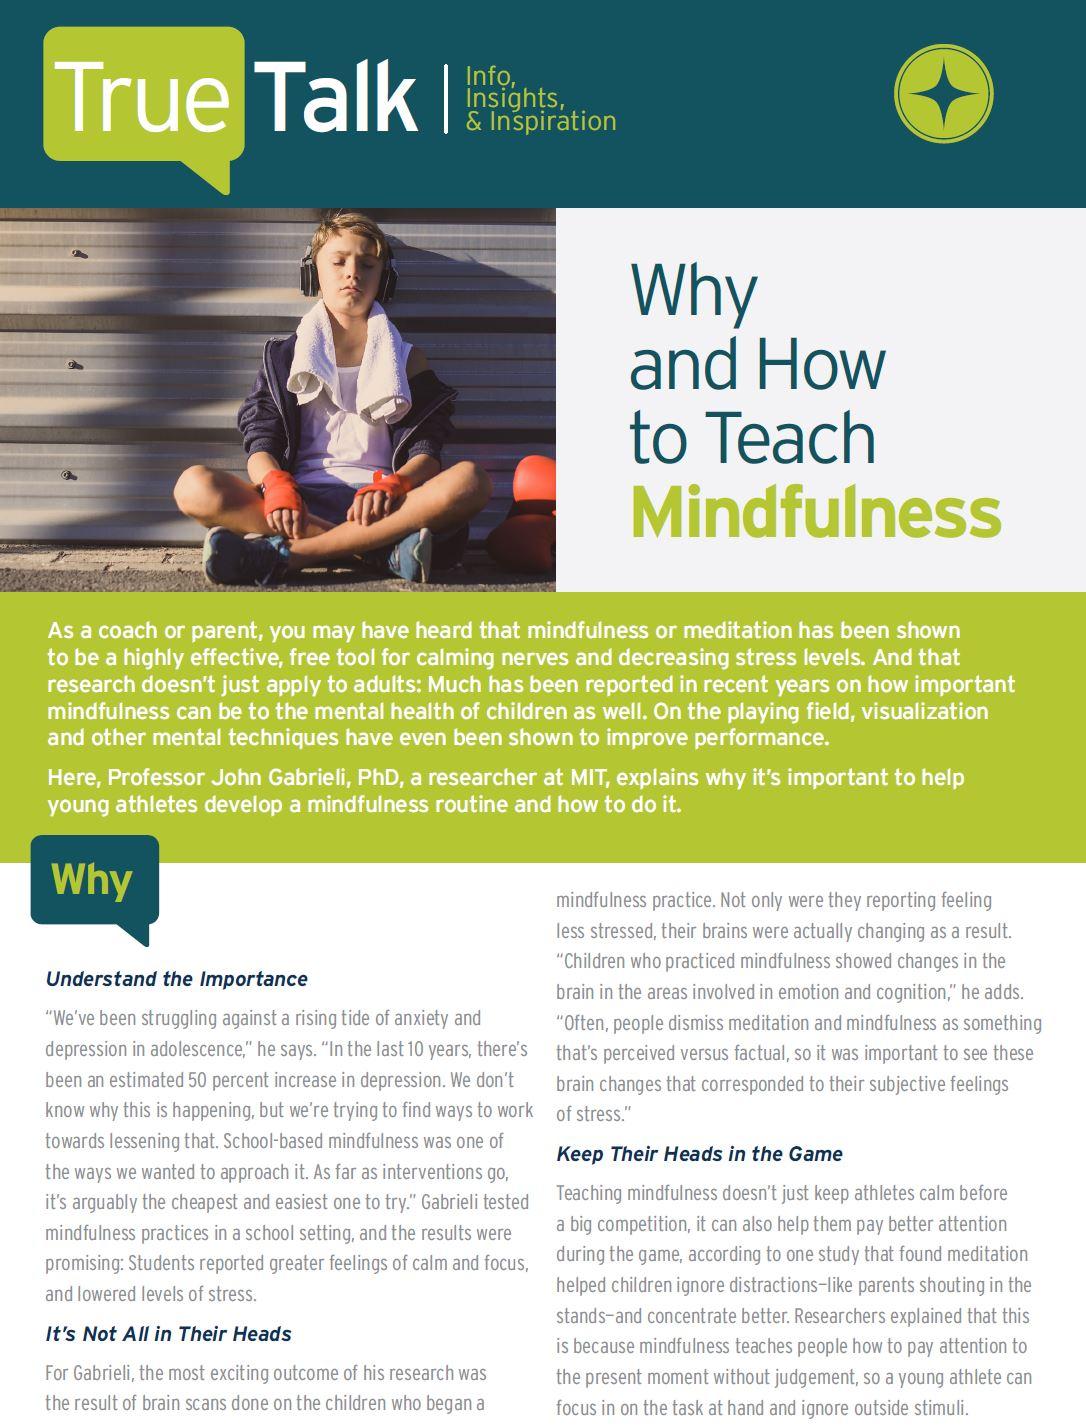 Why and How to Teach Mindfulness.